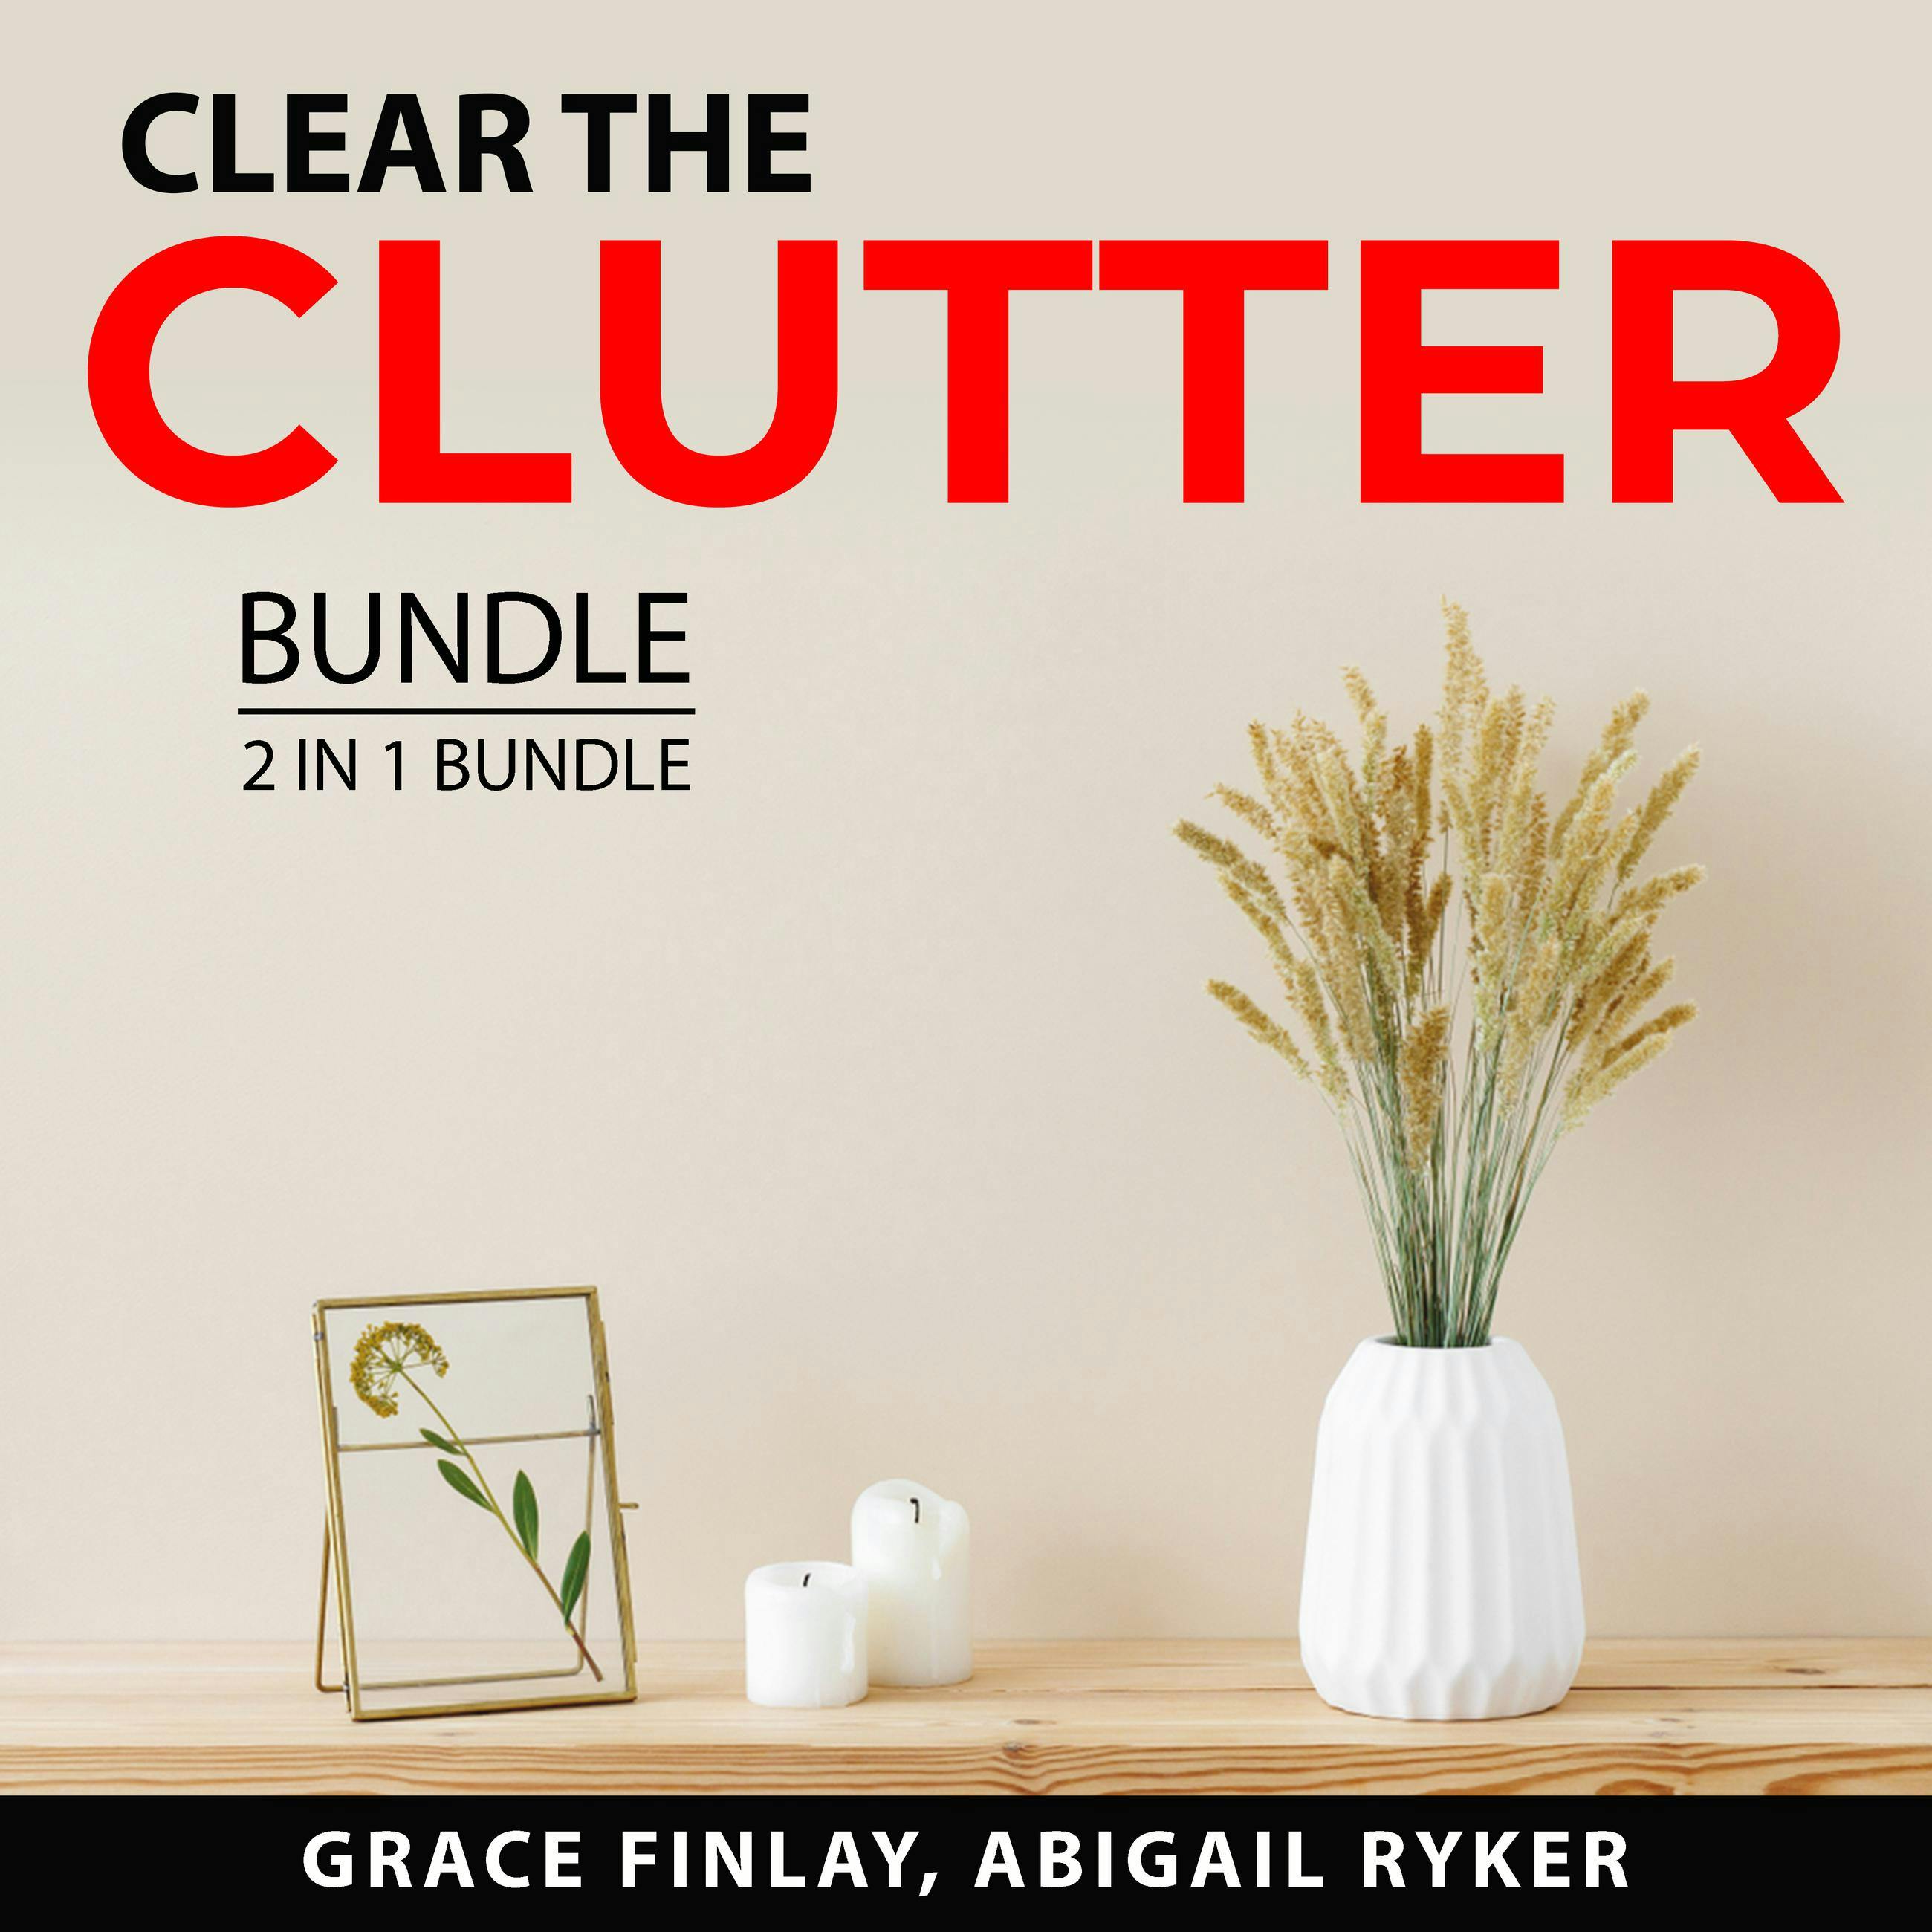 Clear the Clutter Bundle, 2 in 1 Bundle: Clutter Free Life and Declutter Your Life - undefined